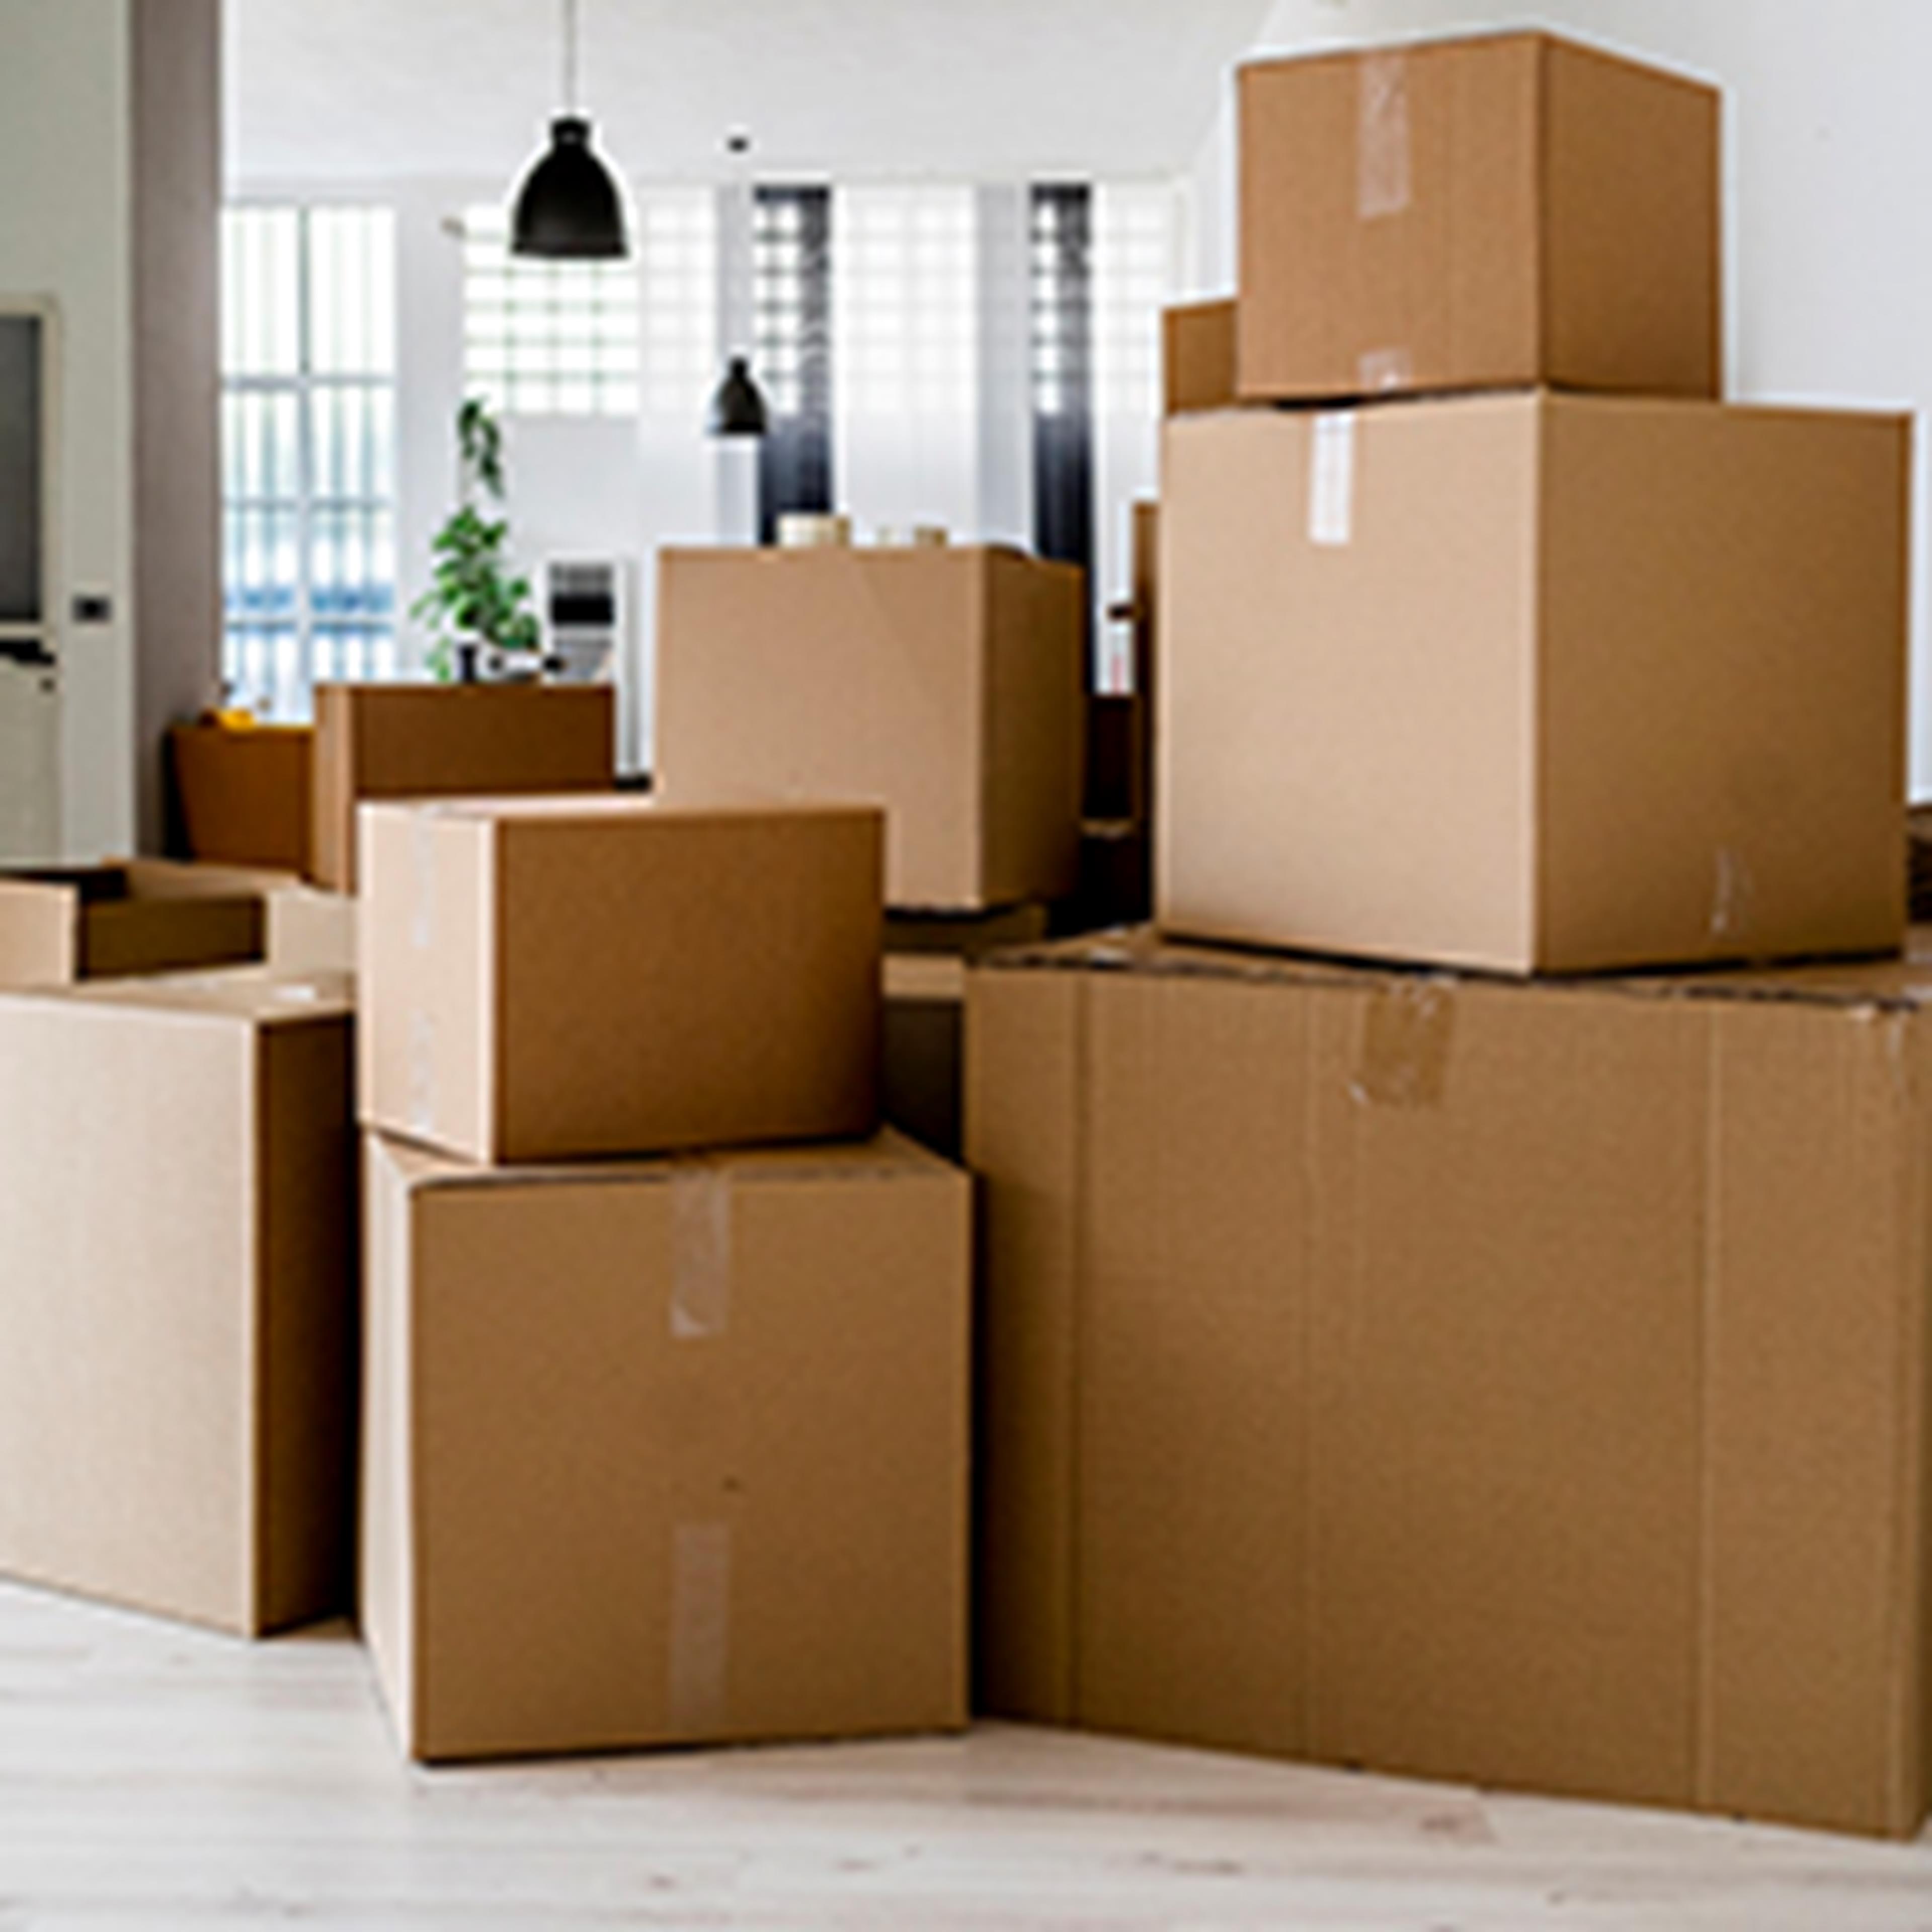 Several boxes in a room